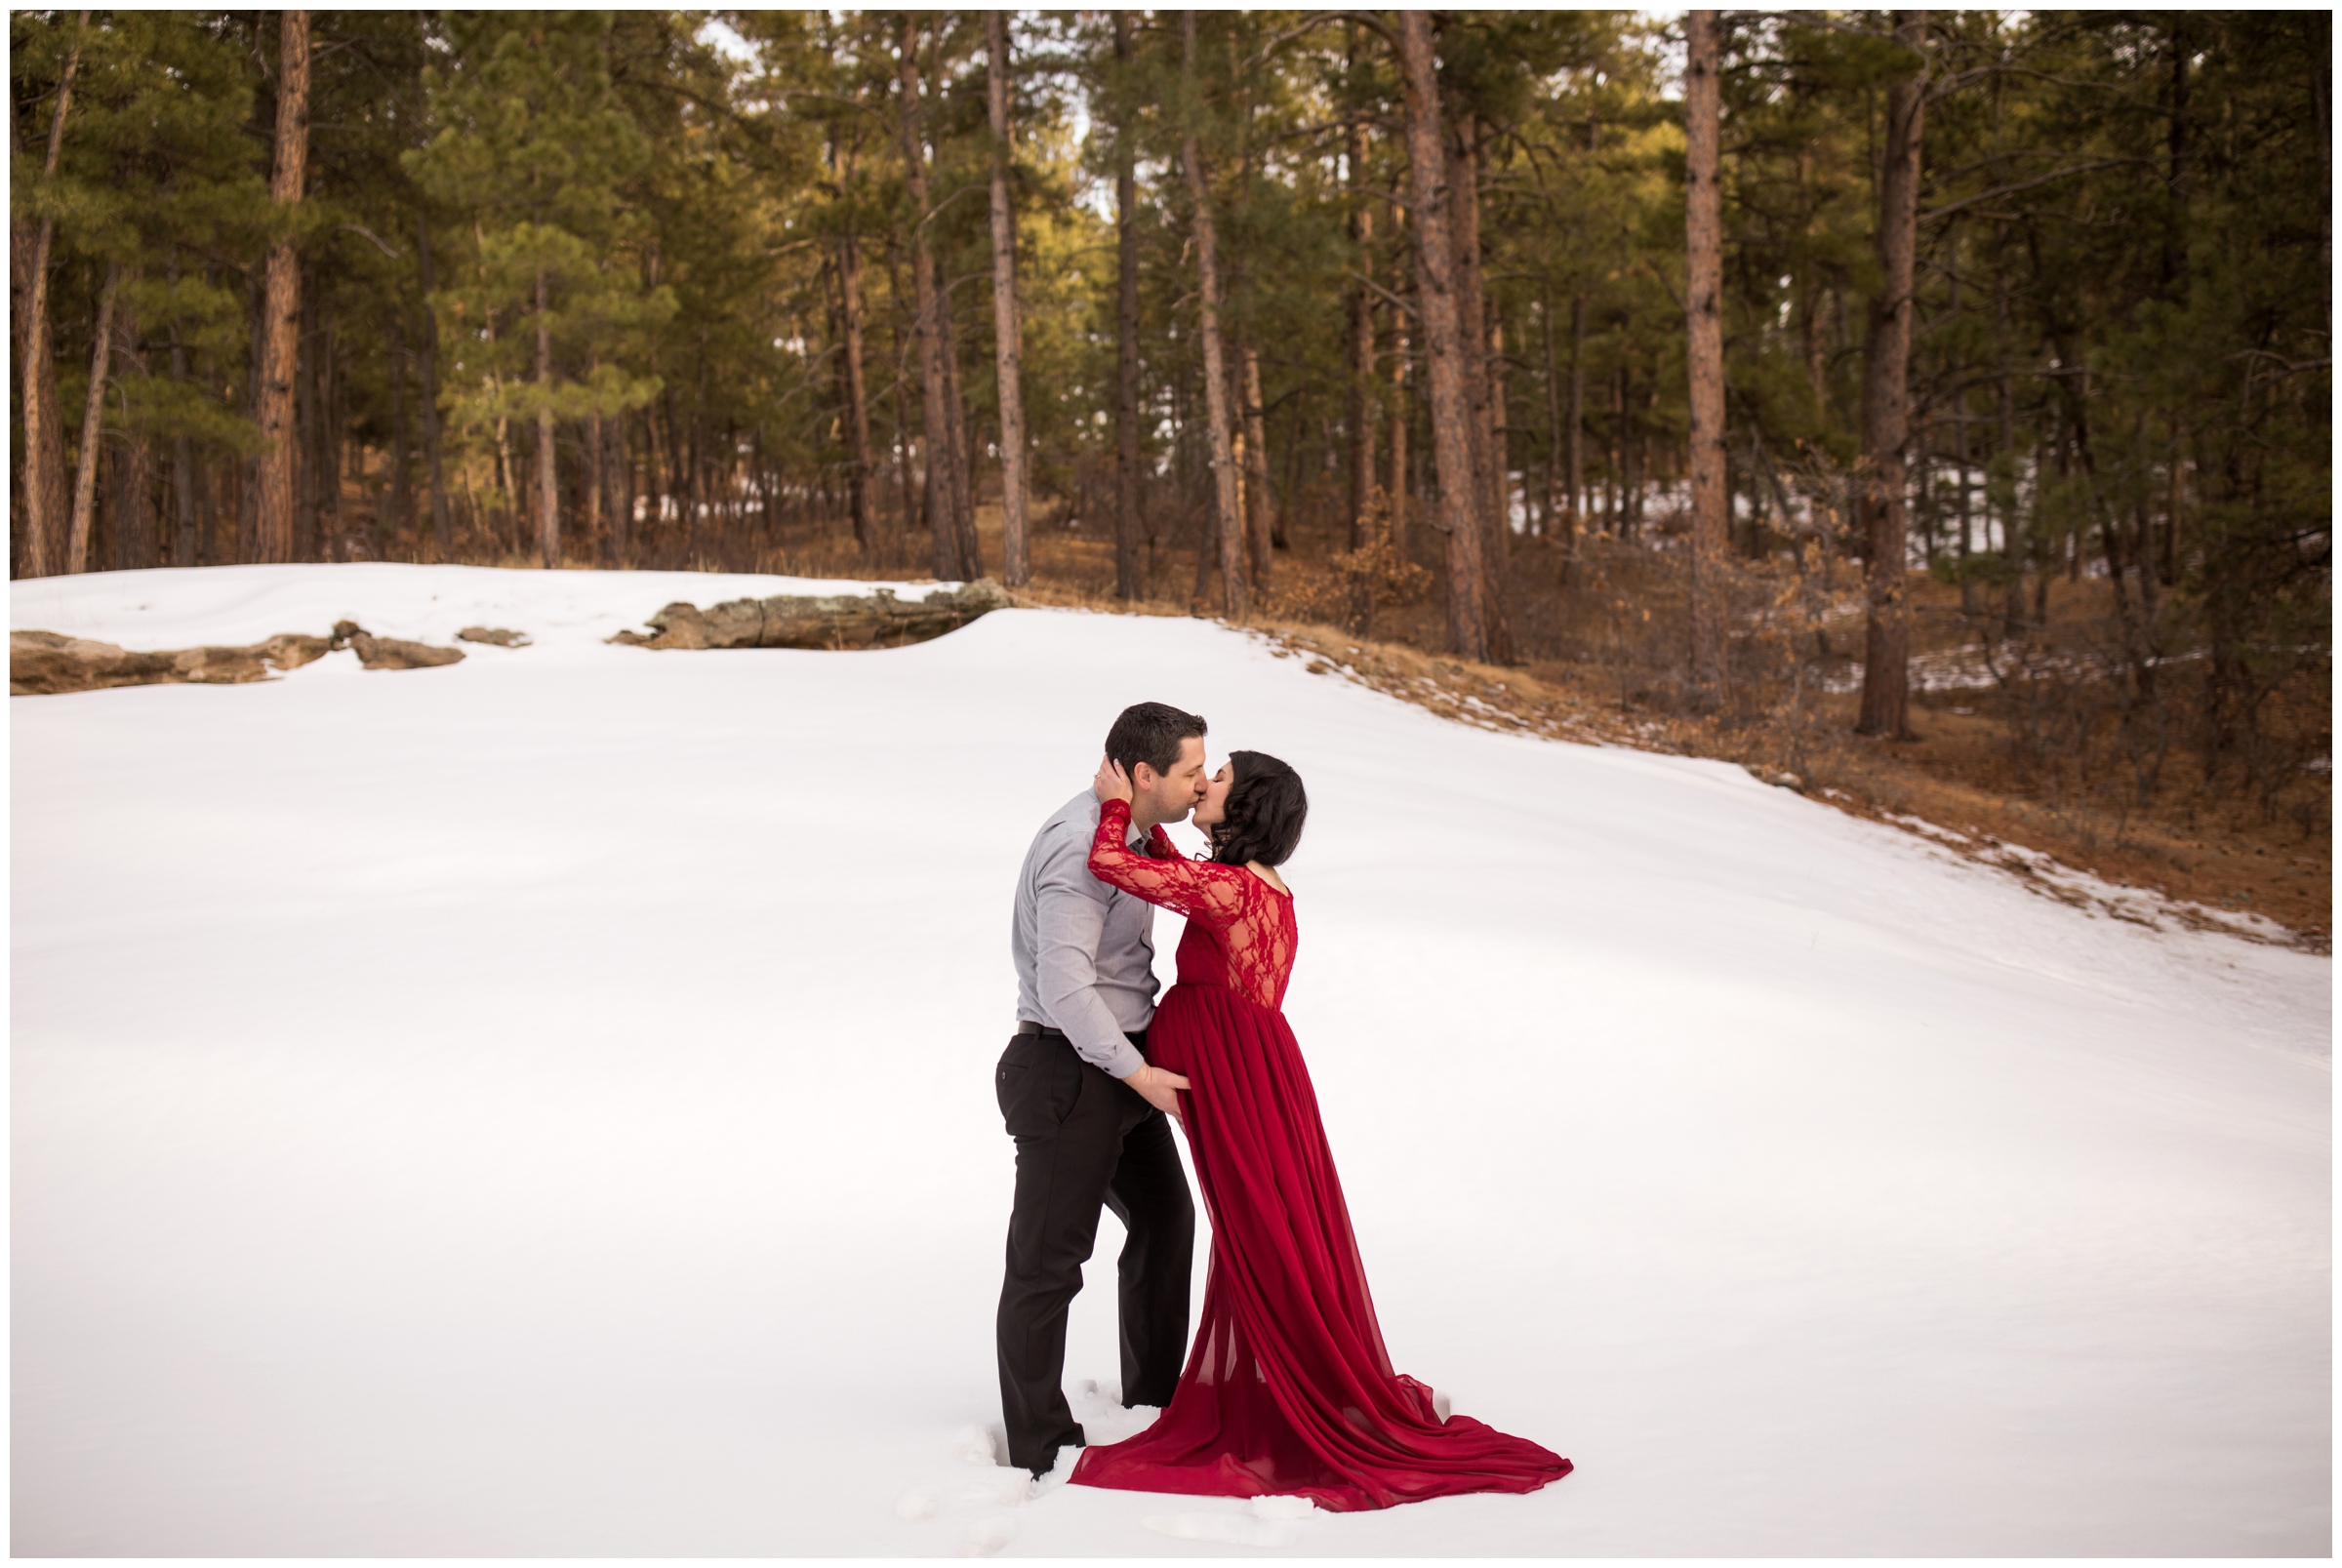 Colorado winter maternity photos in a forest setting by CO portrait photographer Plum Pretty Photography